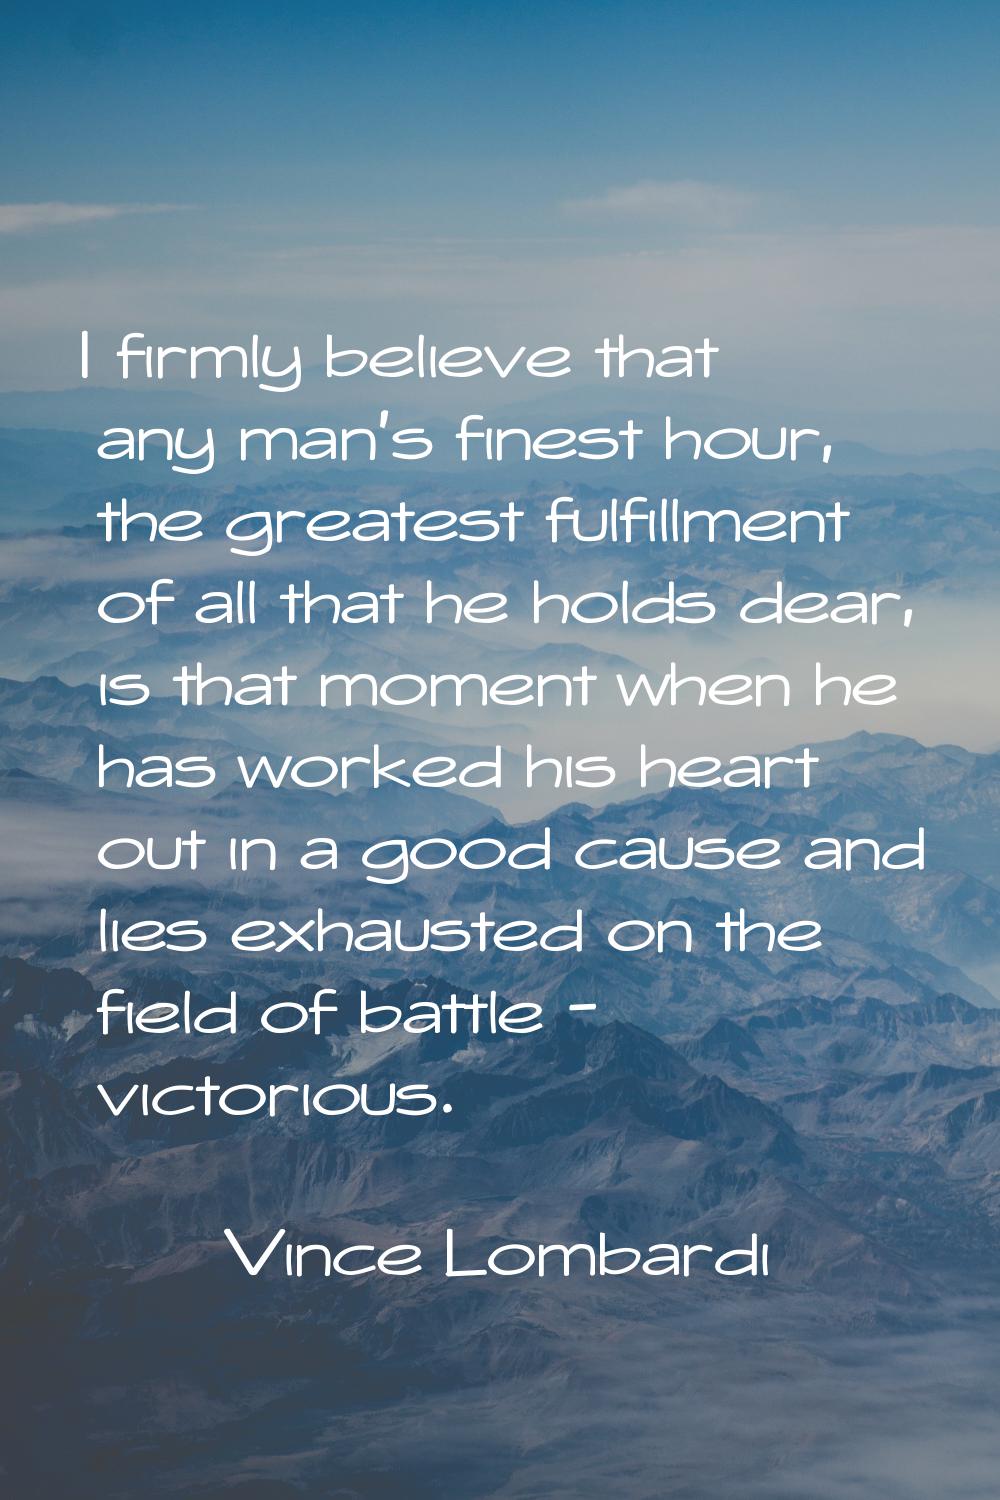 I firmly believe that any man's finest hour, the greatest fulfillment of all that he holds dear, is